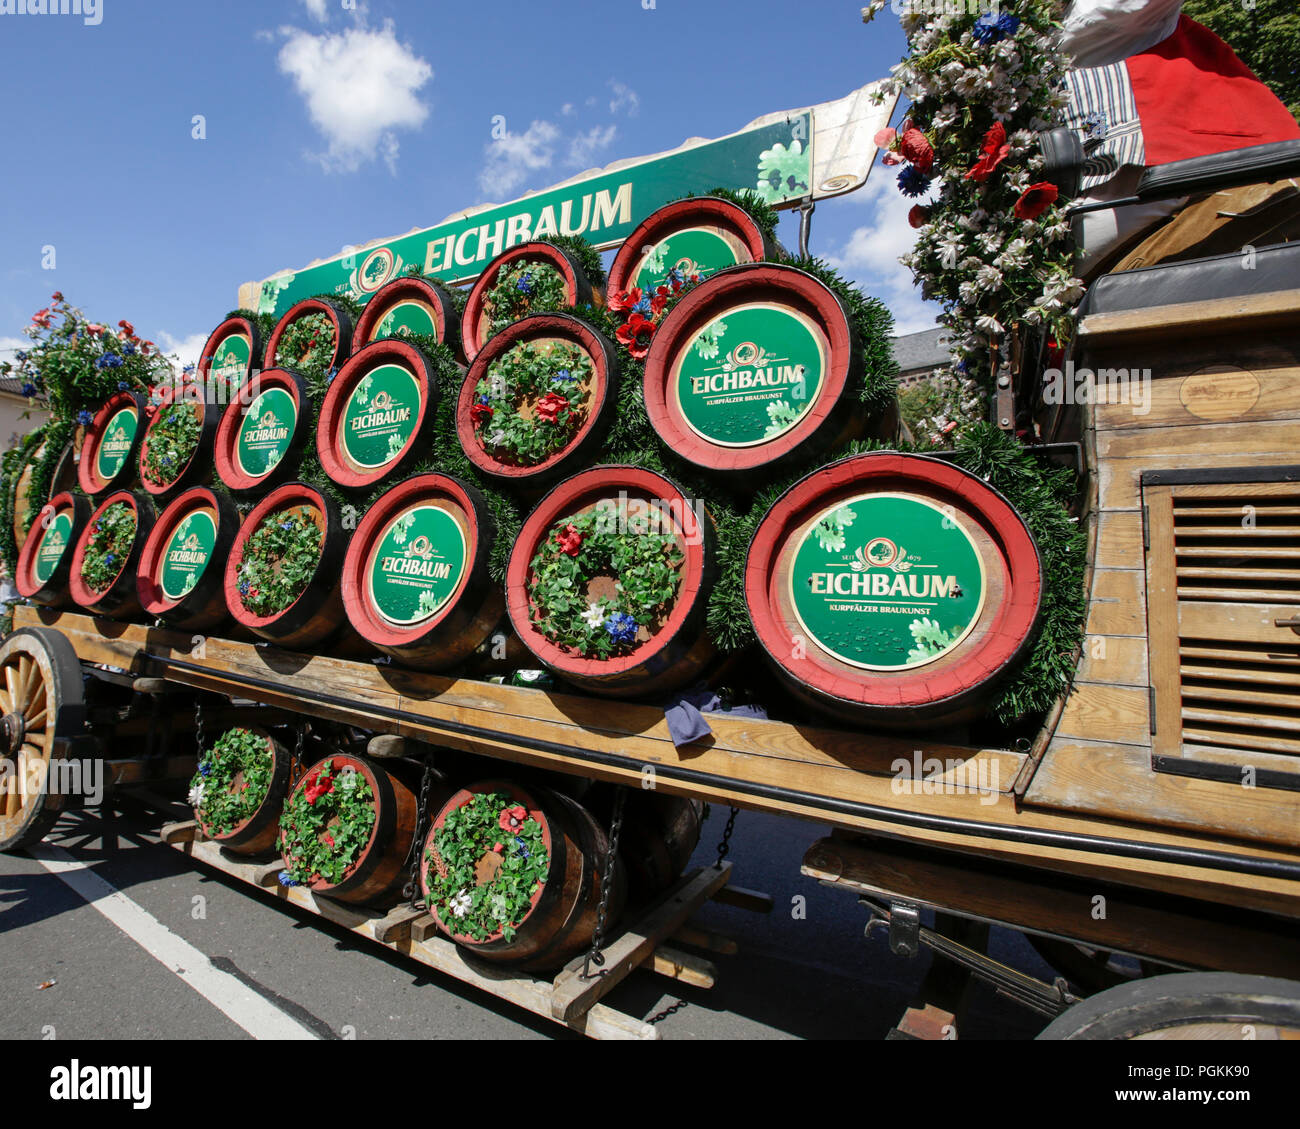 Worms, Germany. 26th Aug, 2018. The Eichbaum brewery uses a vintage horse-drawn cart with beer barrel. The first highlight of the 2018 Backfischfest was the big parade through the city of Worms with over 70 groups and floats. Community groups, music groups and businesses from Worms and further afield took part. Credit: Michael Debets/Pacific Press/Alamy Live News Stock Photo